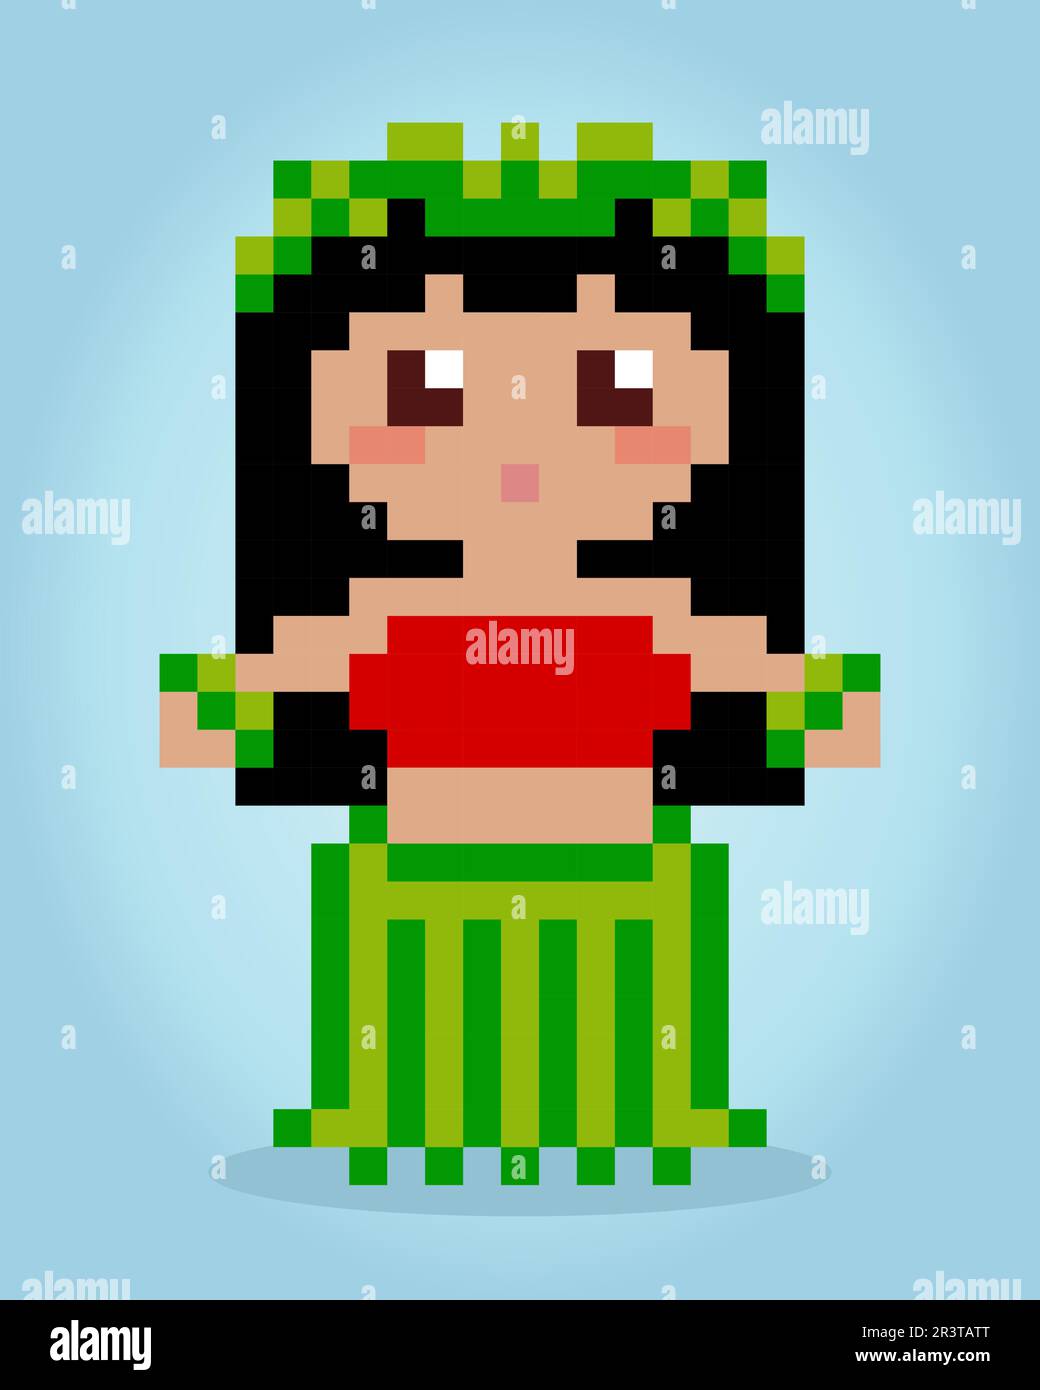 8 bit pixels of hula dancer. Hawaii tradition for game assets and cross stitch patterns in vector illustrations. Stock Vector